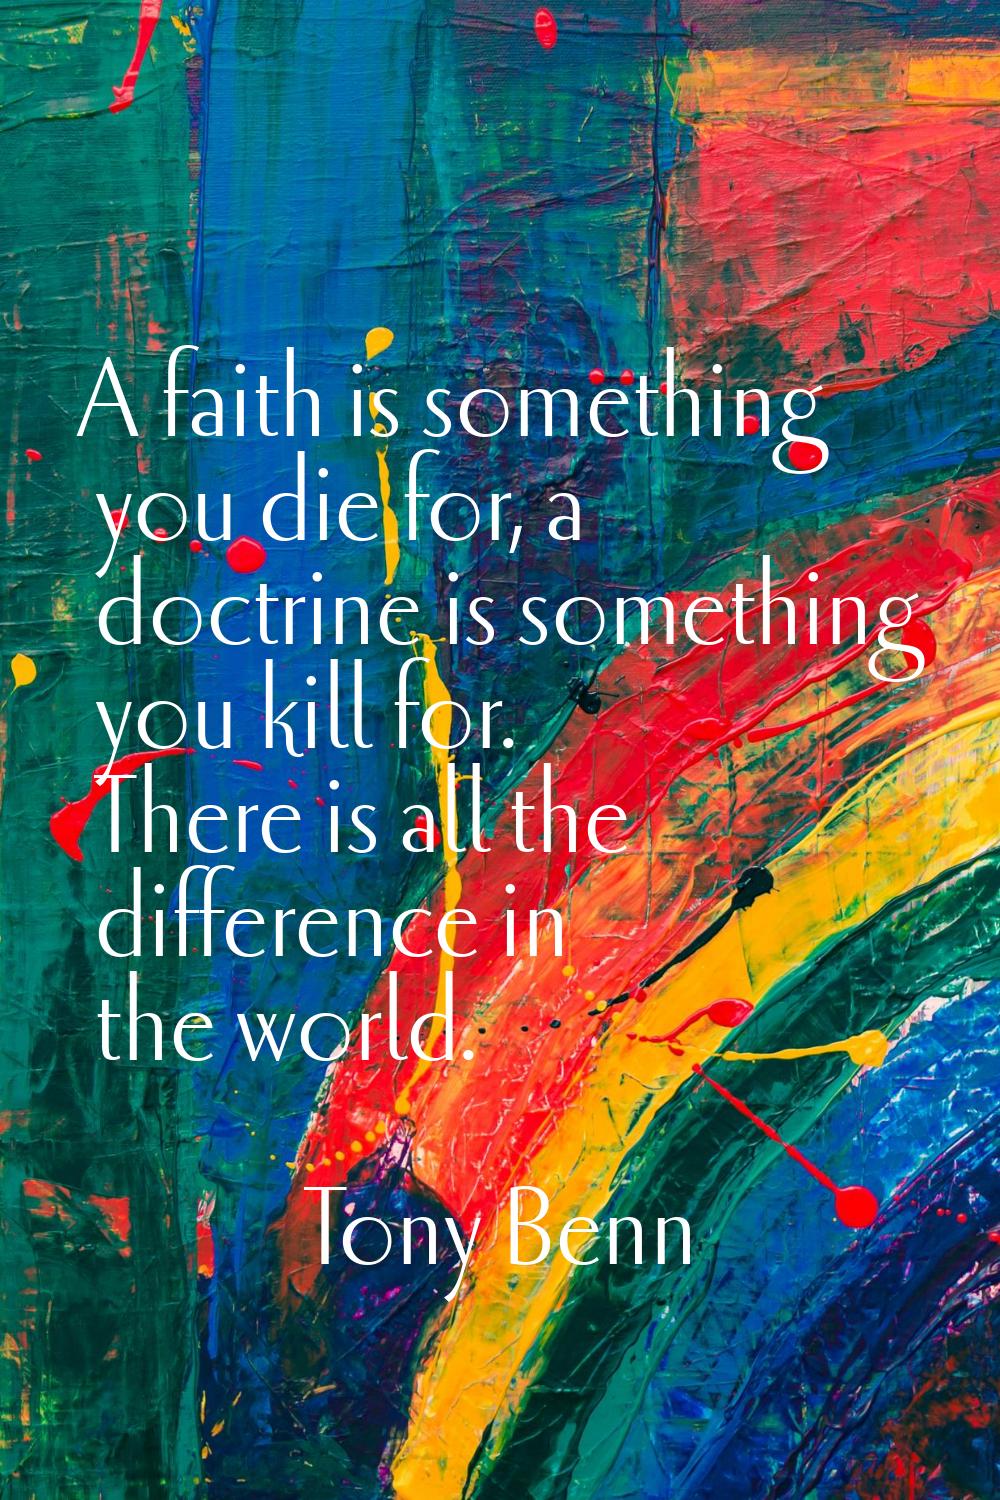 A faith is something you die for, a doctrine is something you kill for. There is all the difference